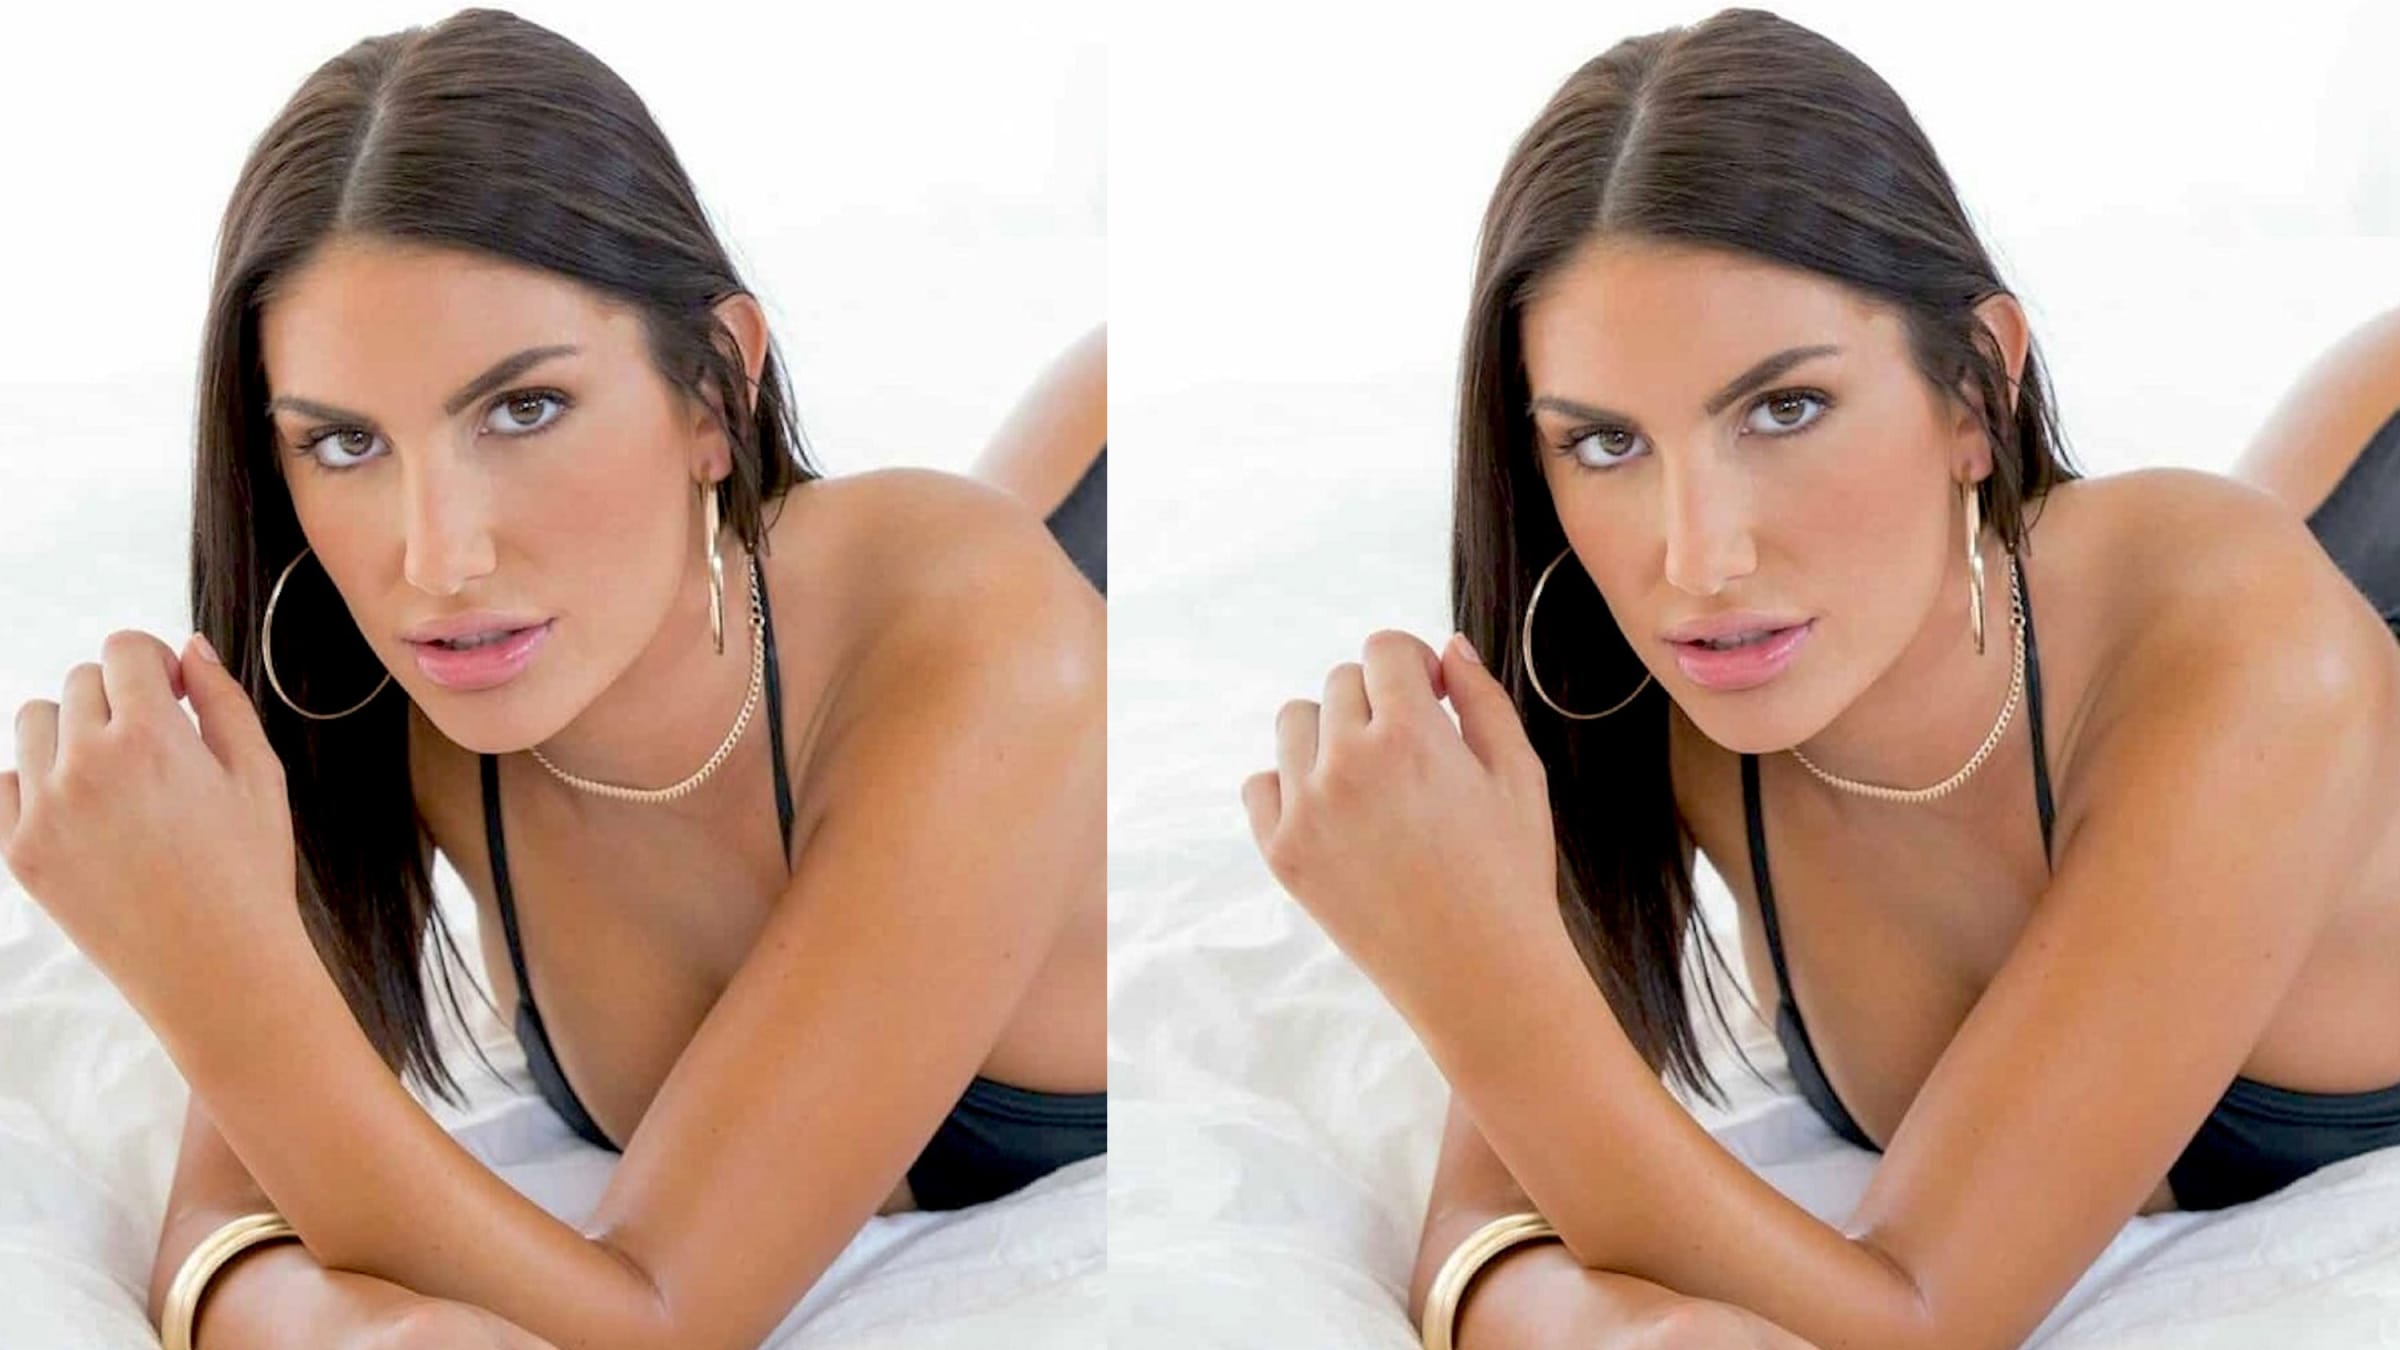 August Porn Ames - Mother of 'Cyberbullied' Porn Star August Ames Opens Up About Her Last Days